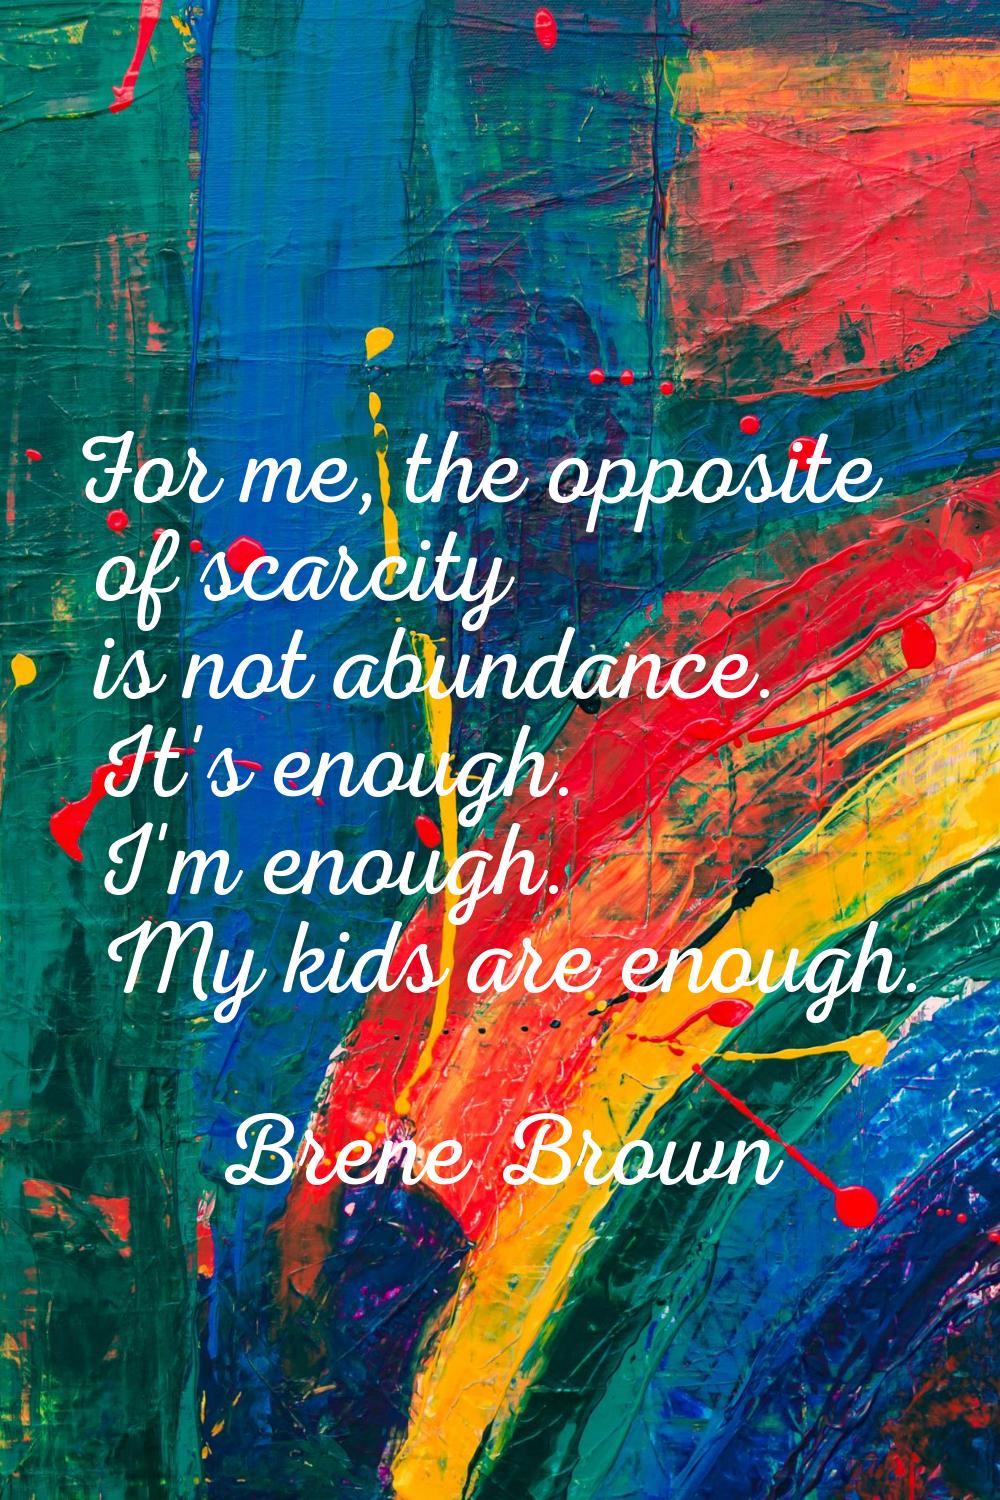 For me, the opposite of scarcity is not abundance. It's enough. I'm enough. My kids are enough.